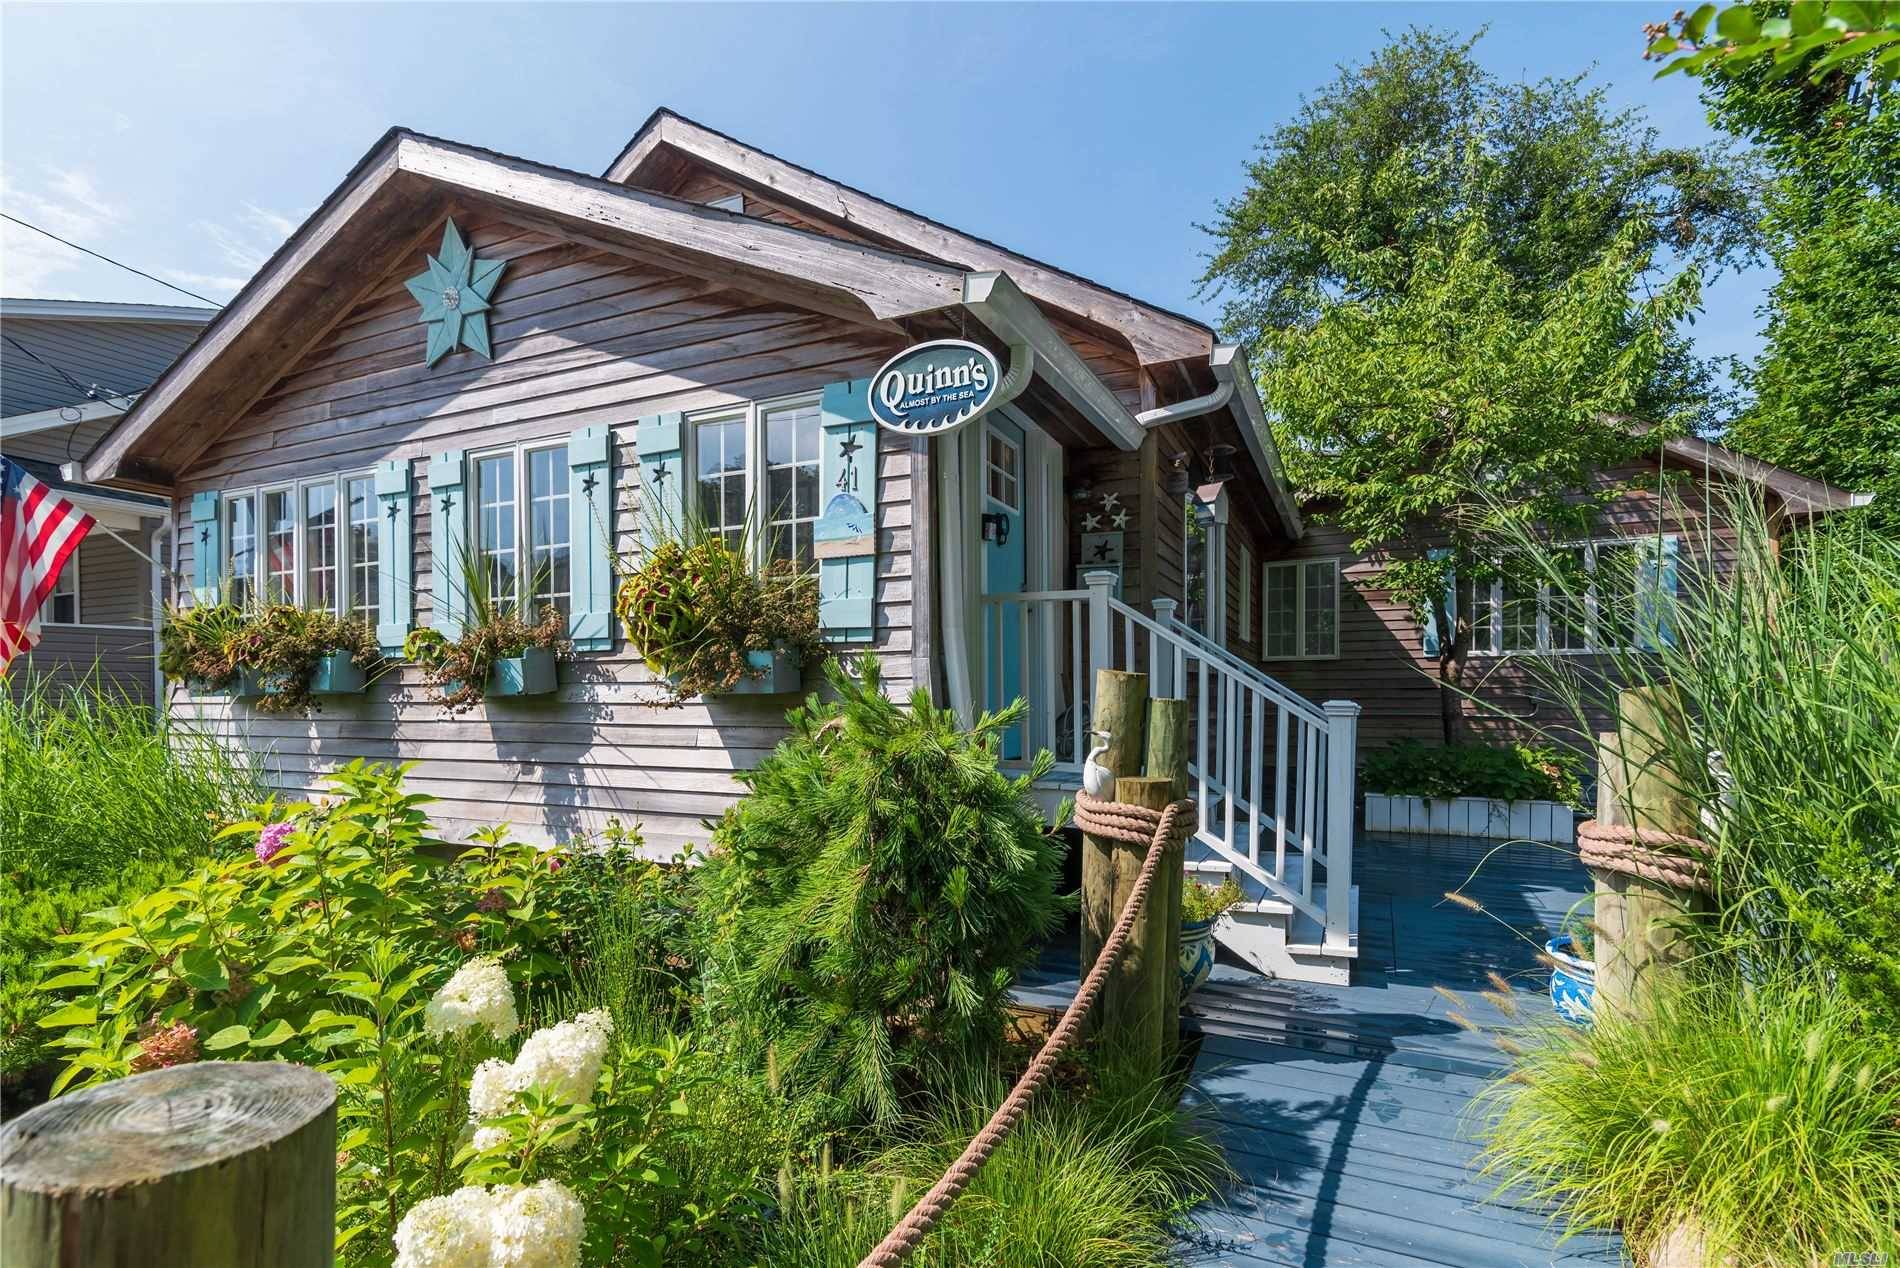 Perfect South Shore Beach Cottage completely rebuilt in 2015 in Grandview Gardens Beach Community.